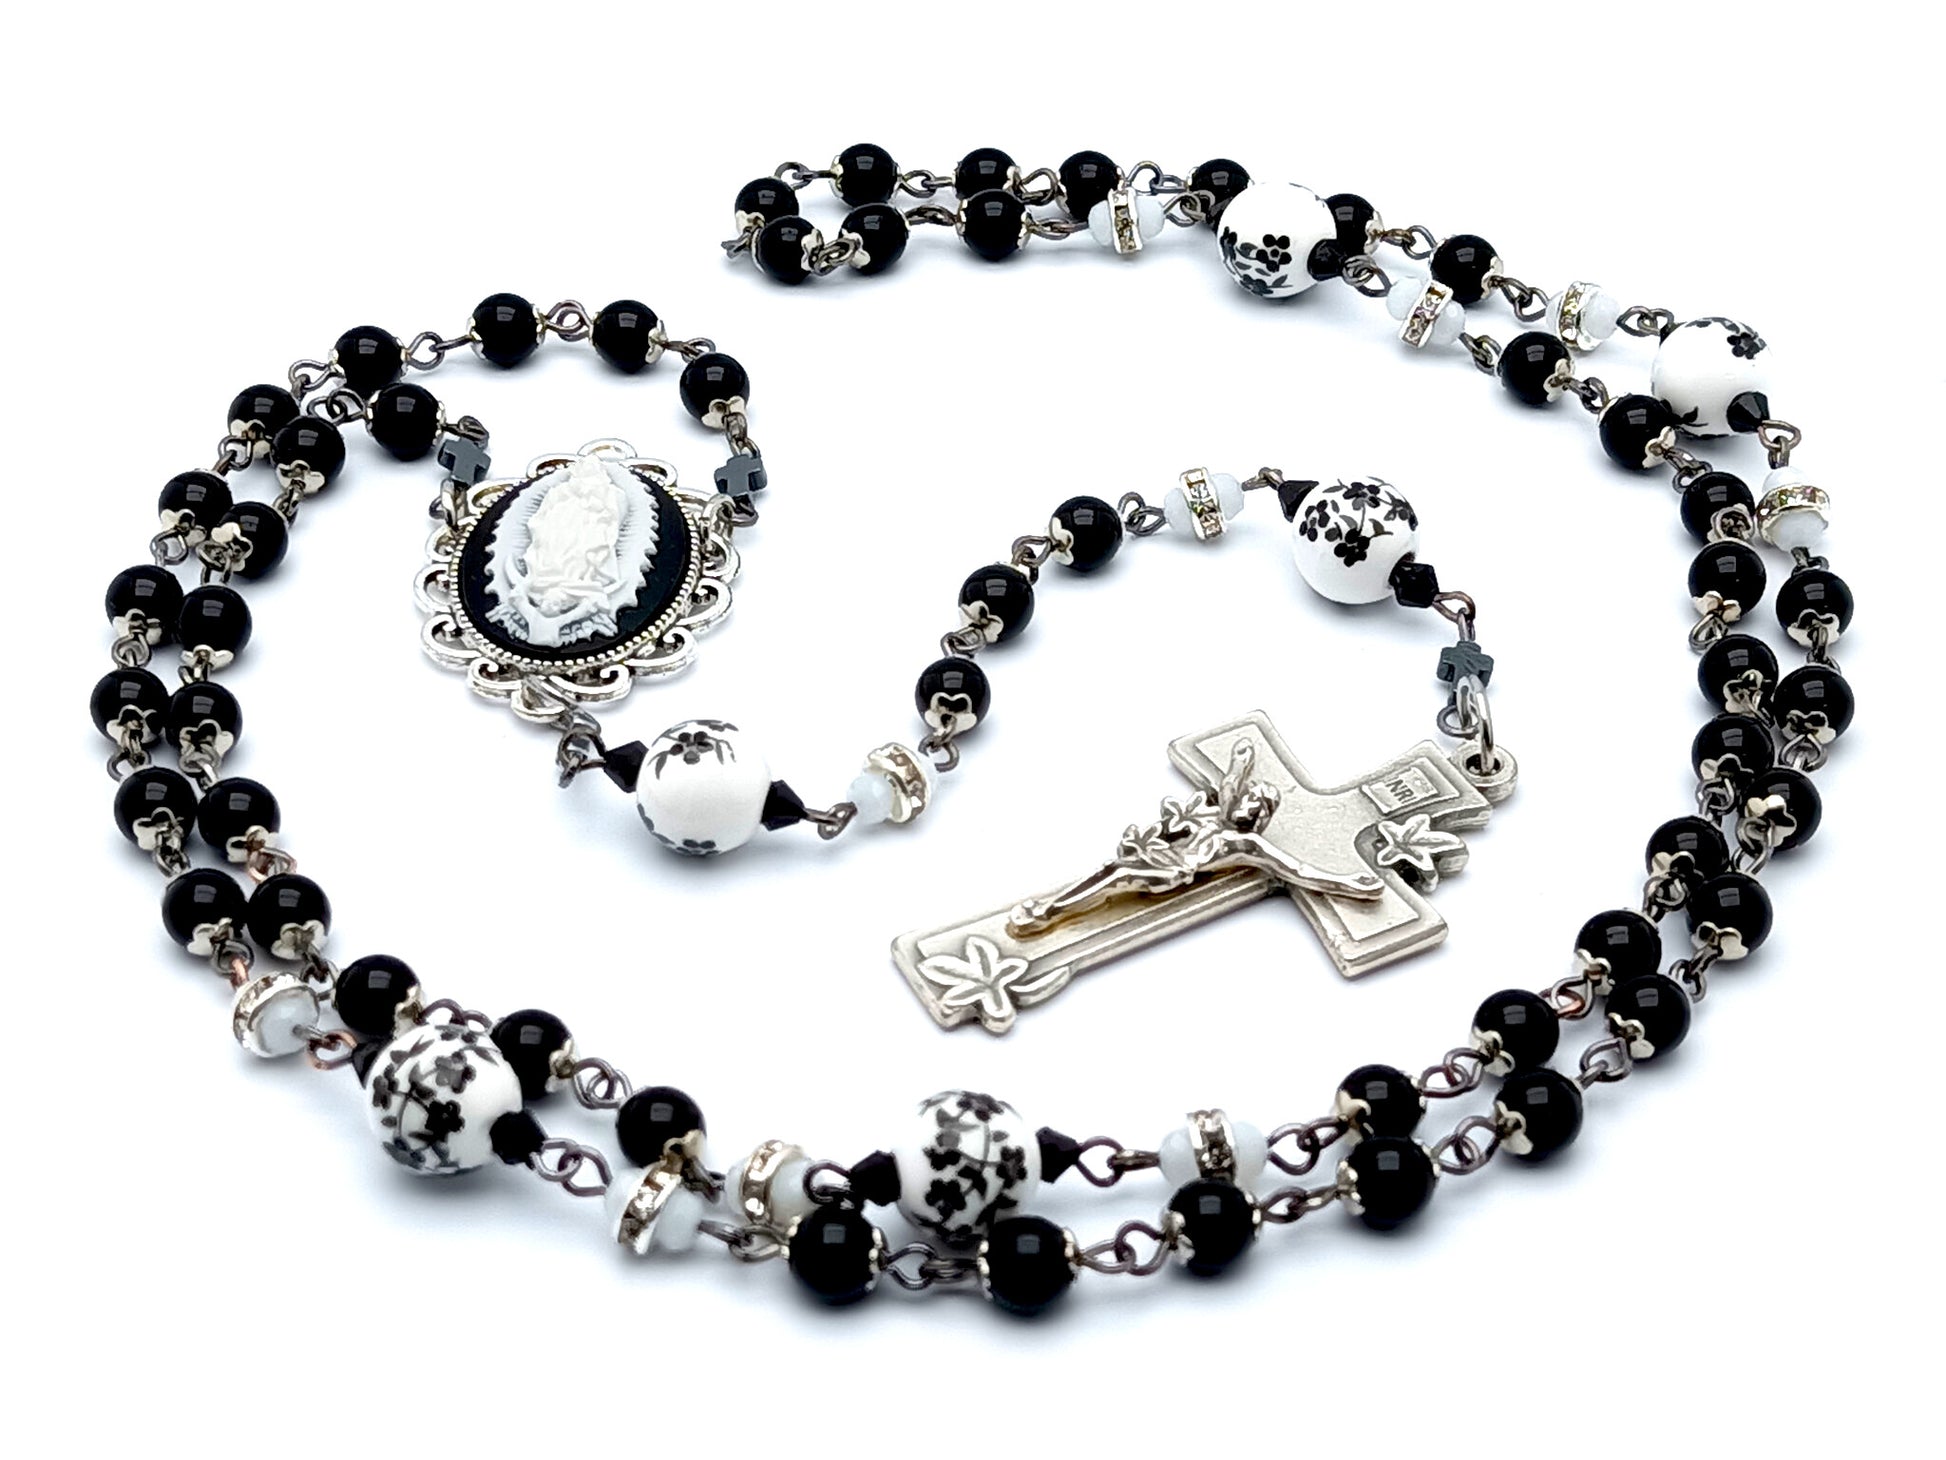 Our Lady of Guadalupe cameo unique rosary beads with onyx gemstone and porcelain beads and lily crucifix.